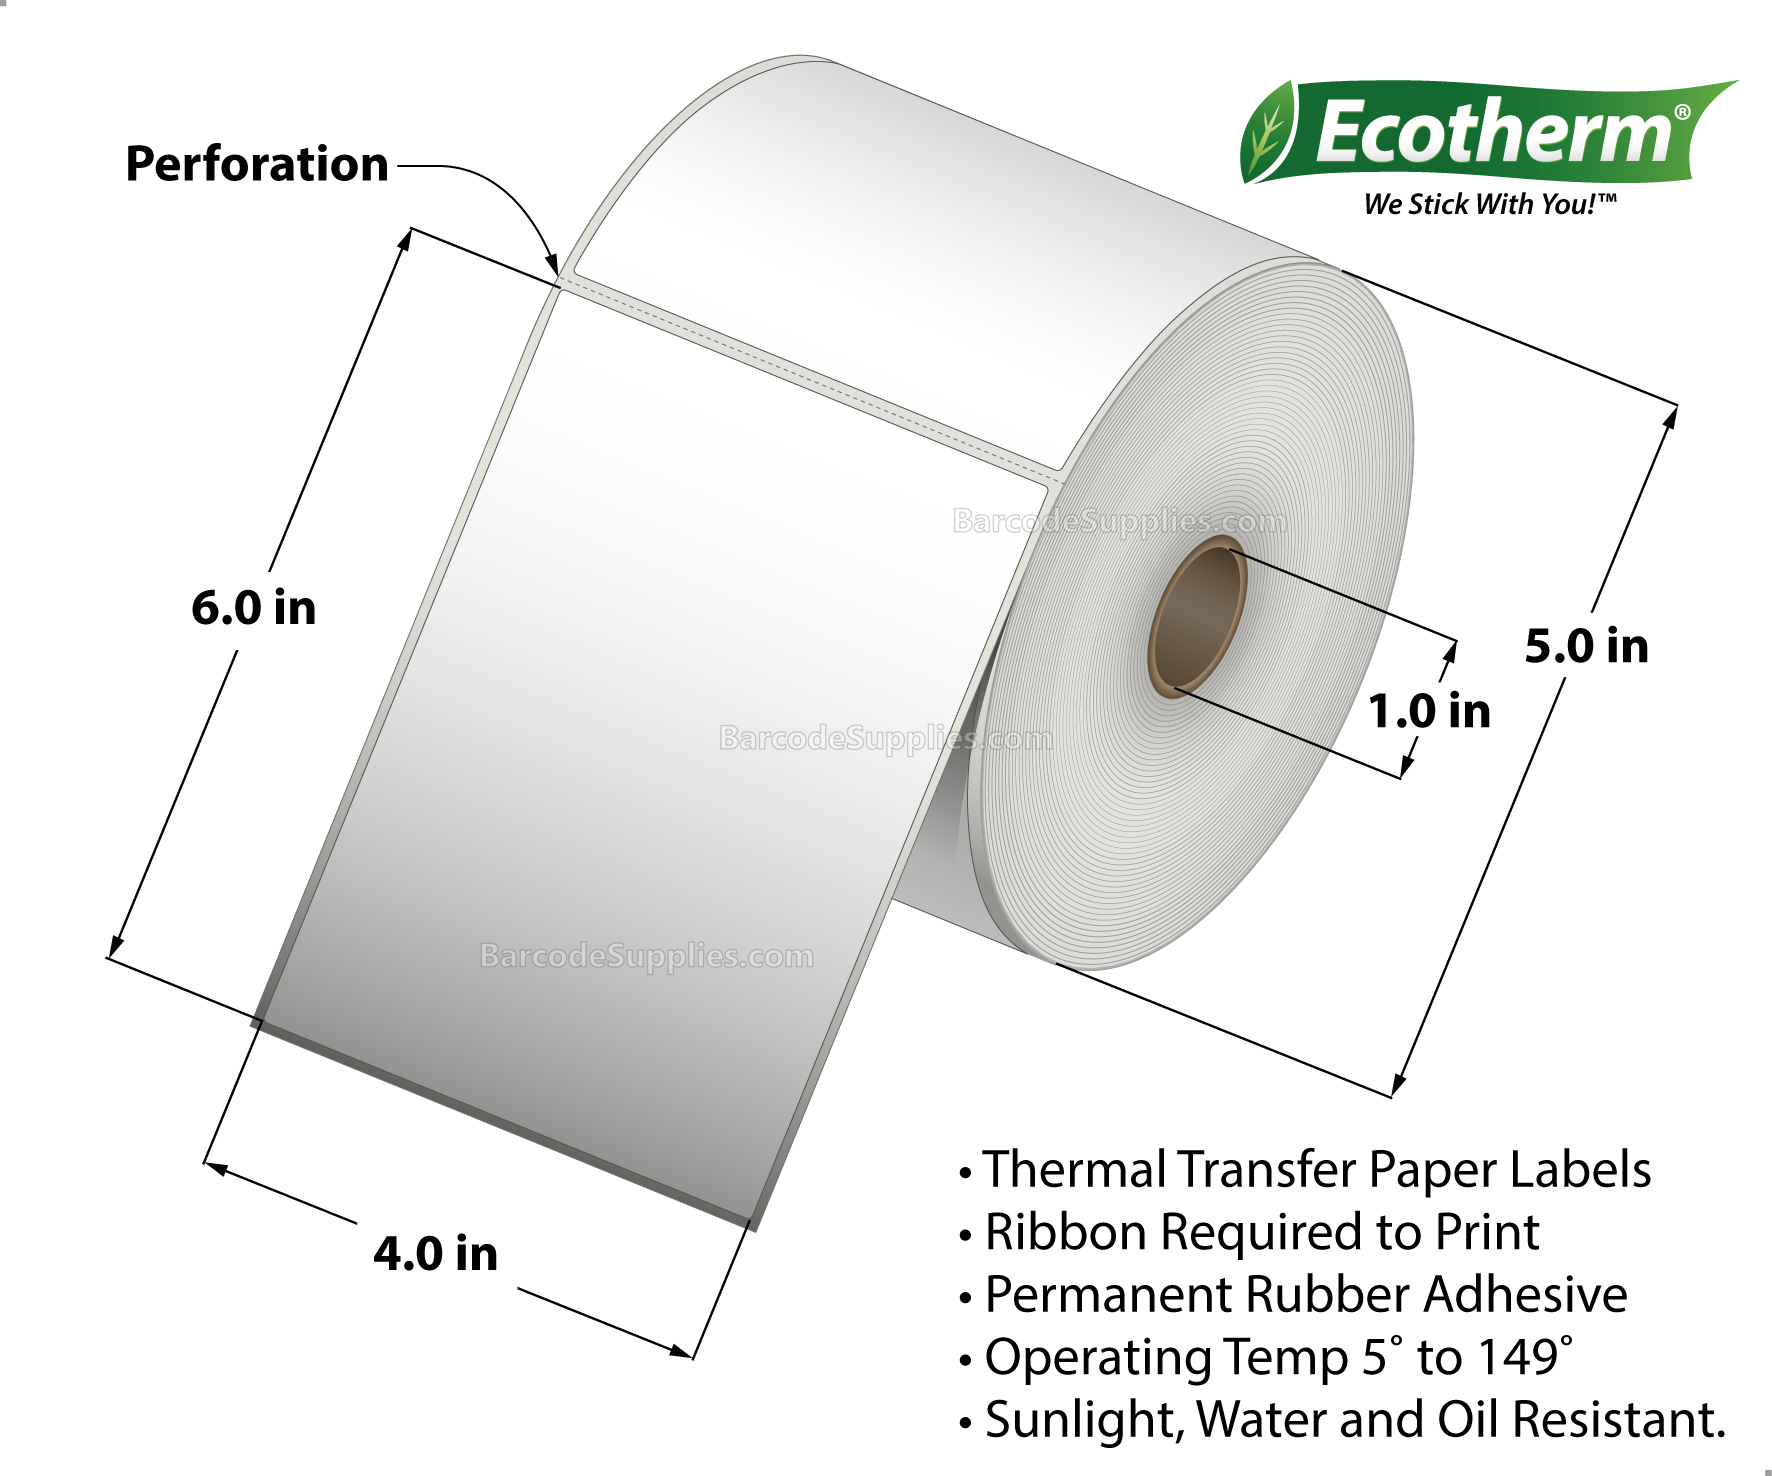 4 x 6 Thermal Transfer White Labels With Rubber Adhesive - Perforated - 475 Labels Per Roll - Carton Of 6 Rolls - 2850 Labels Total - MPN: ECOTHERM25124-6